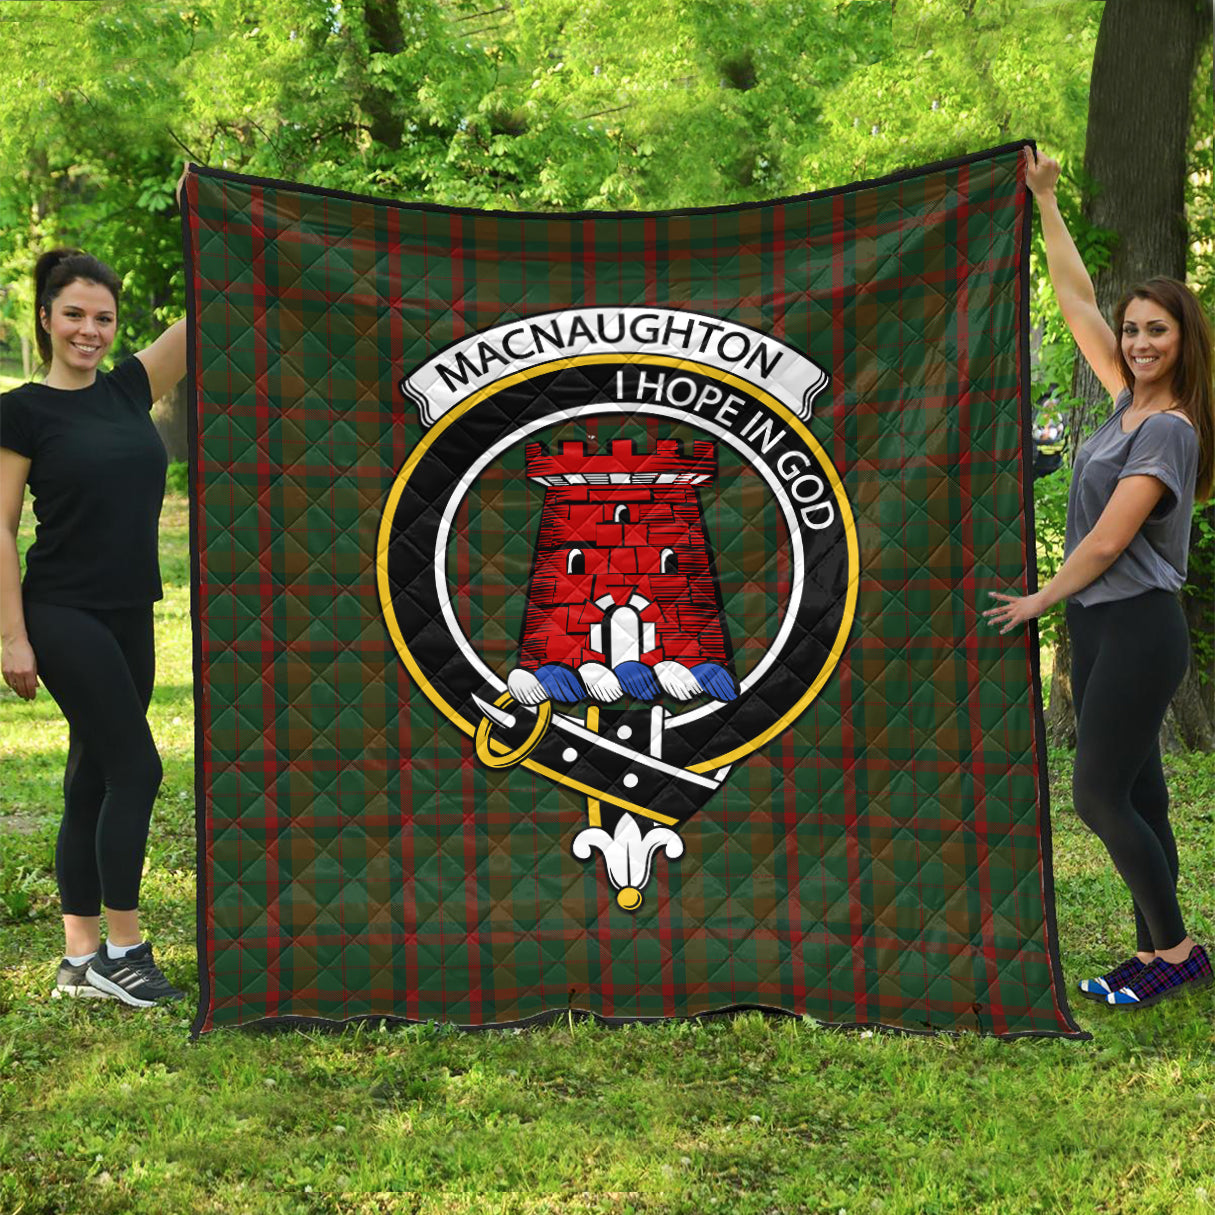 macnaughton-hunting-tartan-quilt-with-family-crest